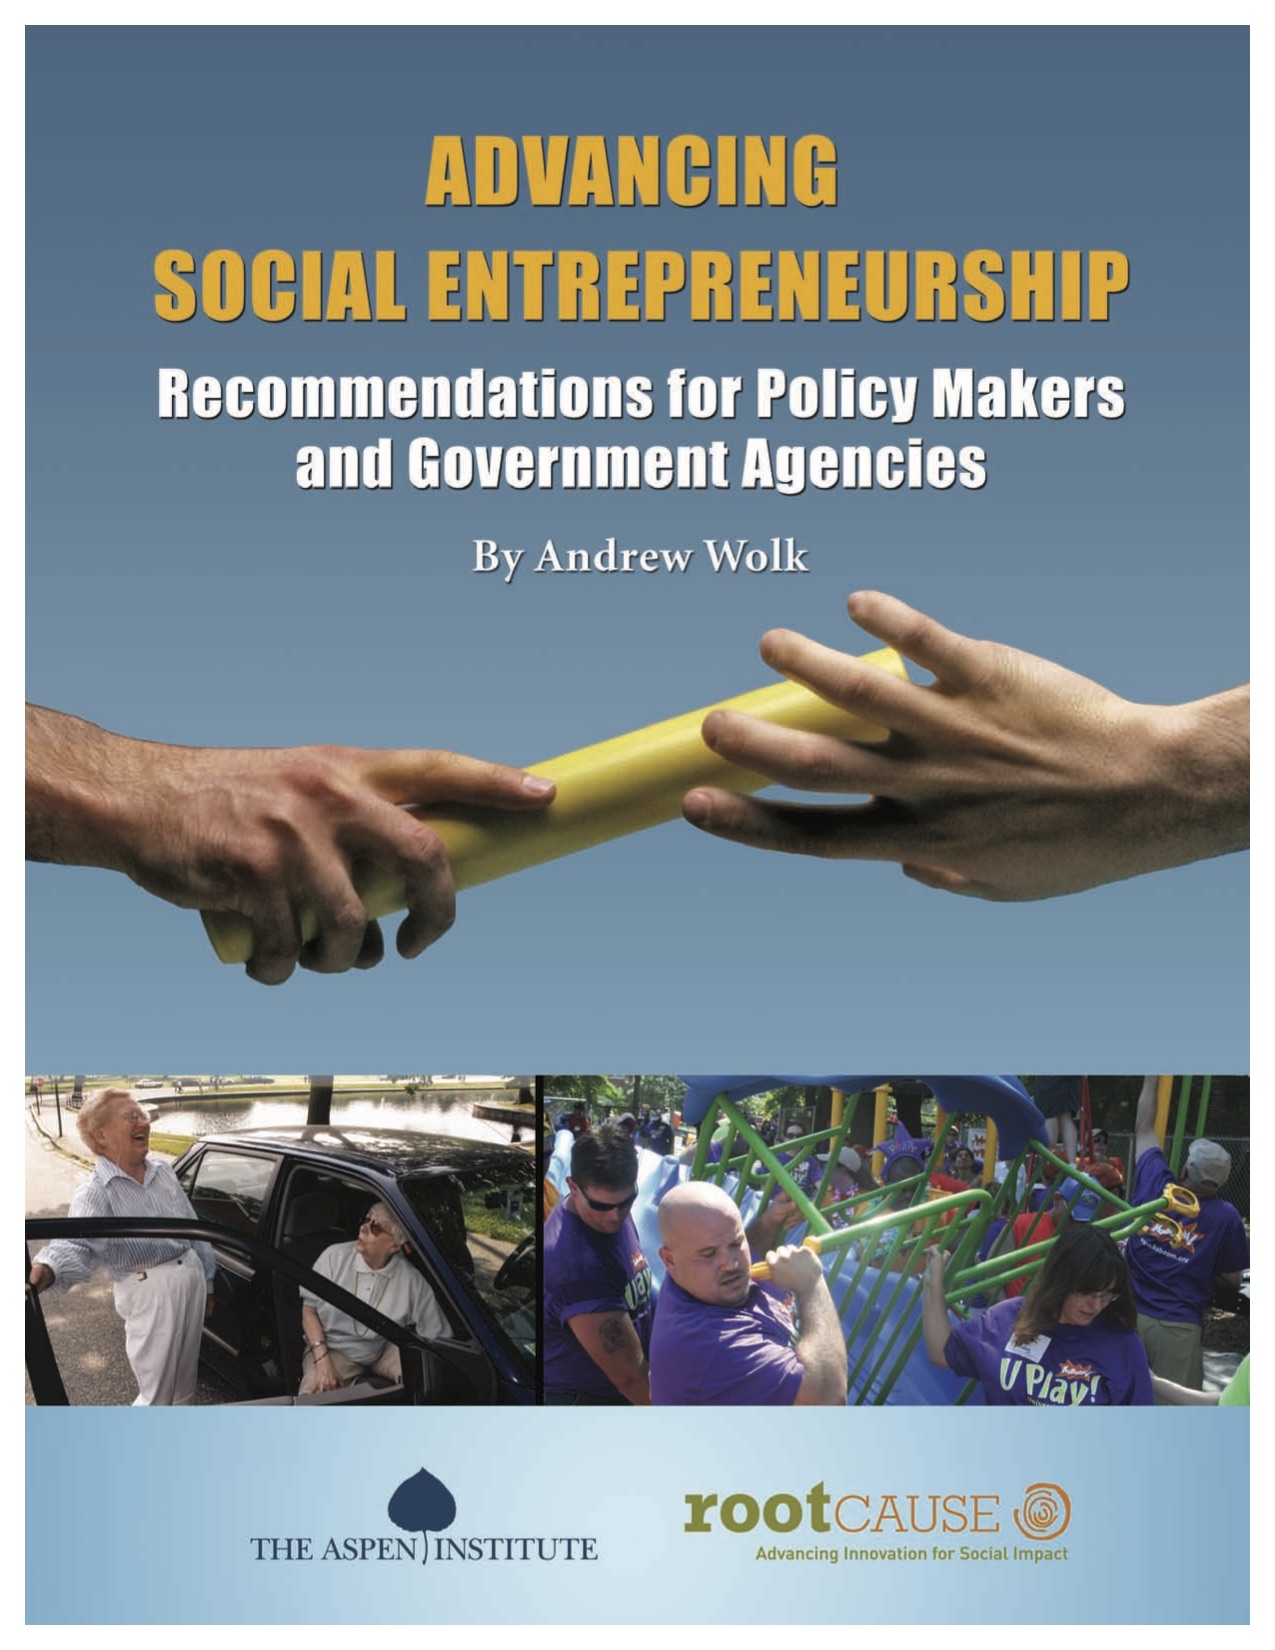 Advancing Social Entrepreneurship: Recommendations for Policy Makers and Government Agencies